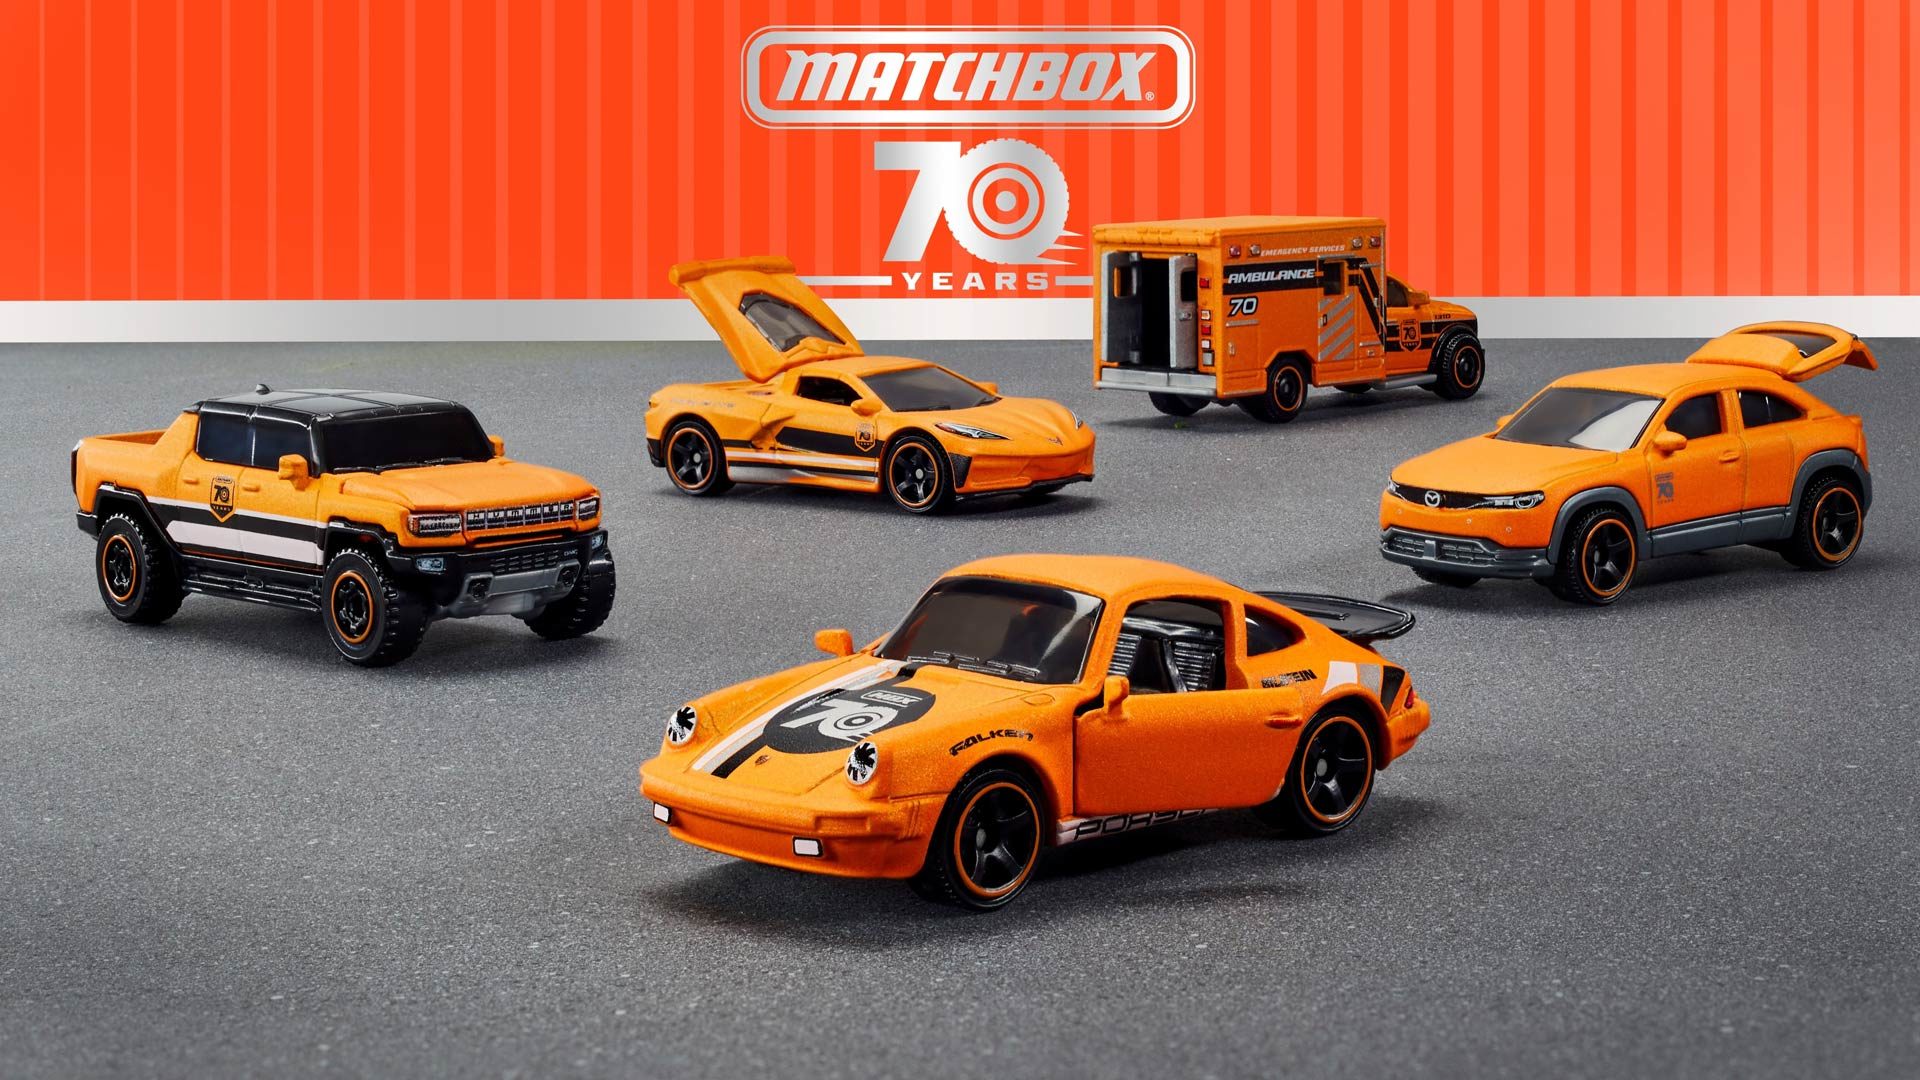 Matchbox celebrates 70th anniversary with limited edition model